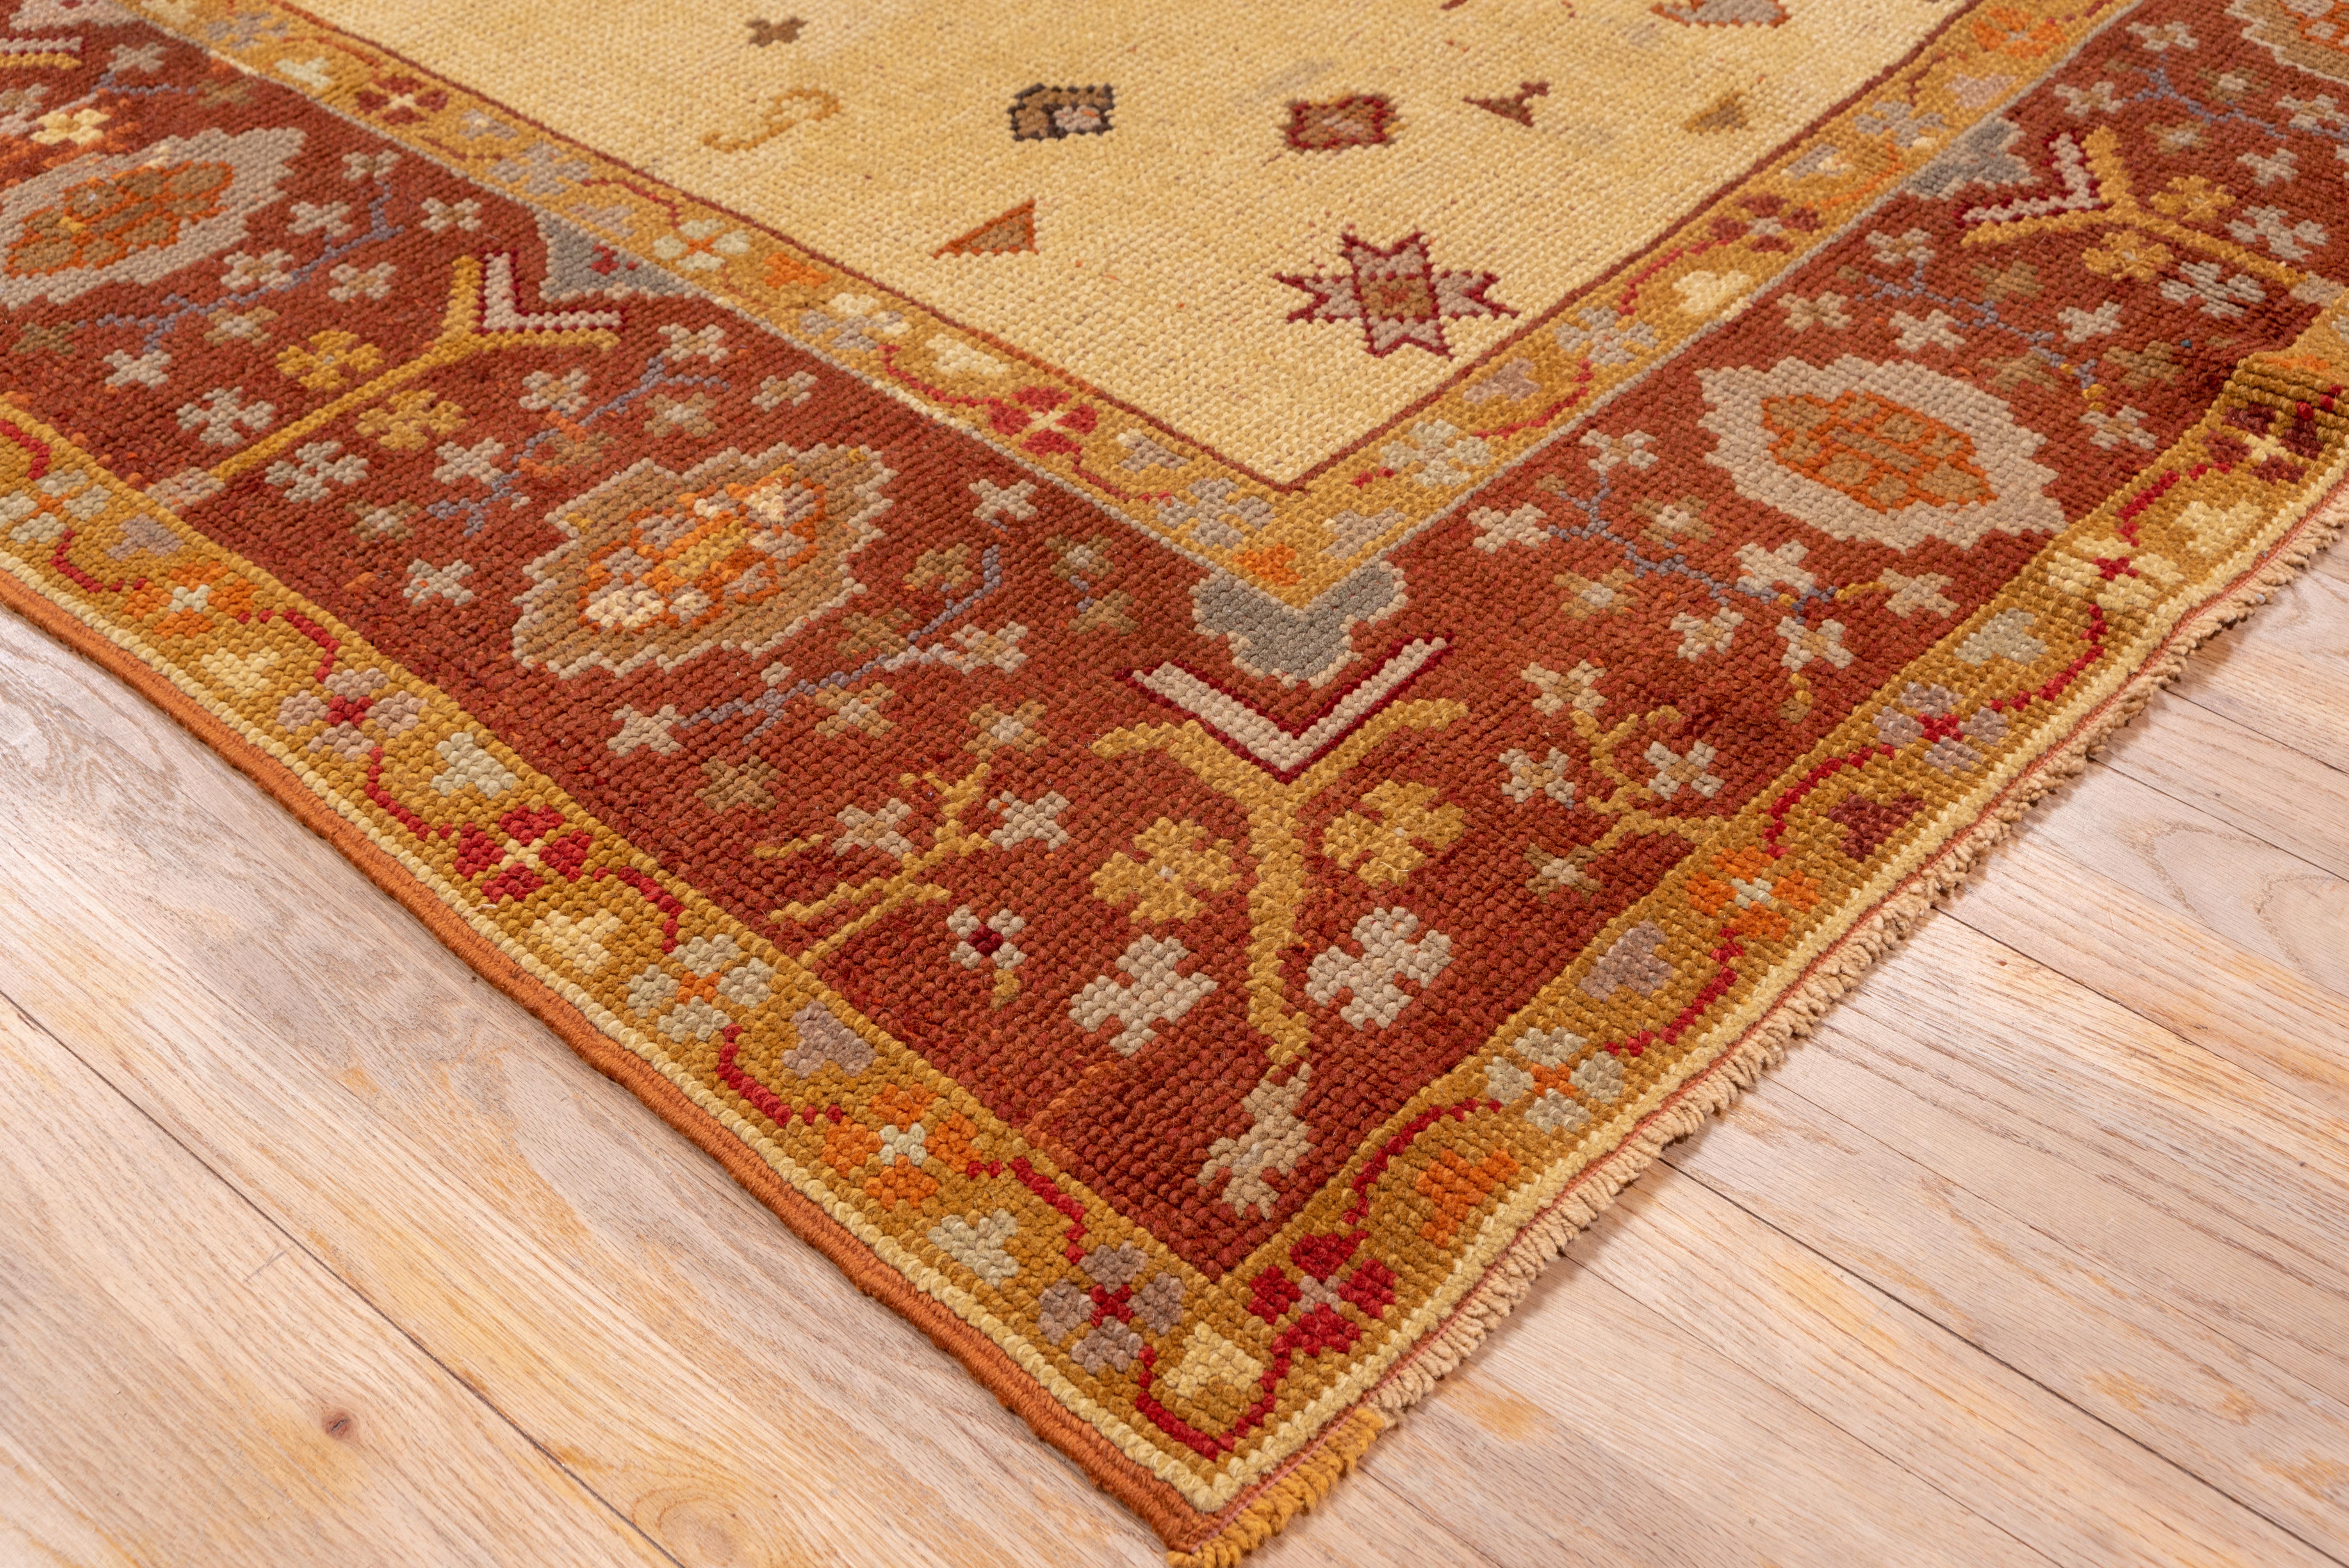 Antique Decorative Oushak Carpet, circa 1910s In Good Condition For Sale In New York, NY